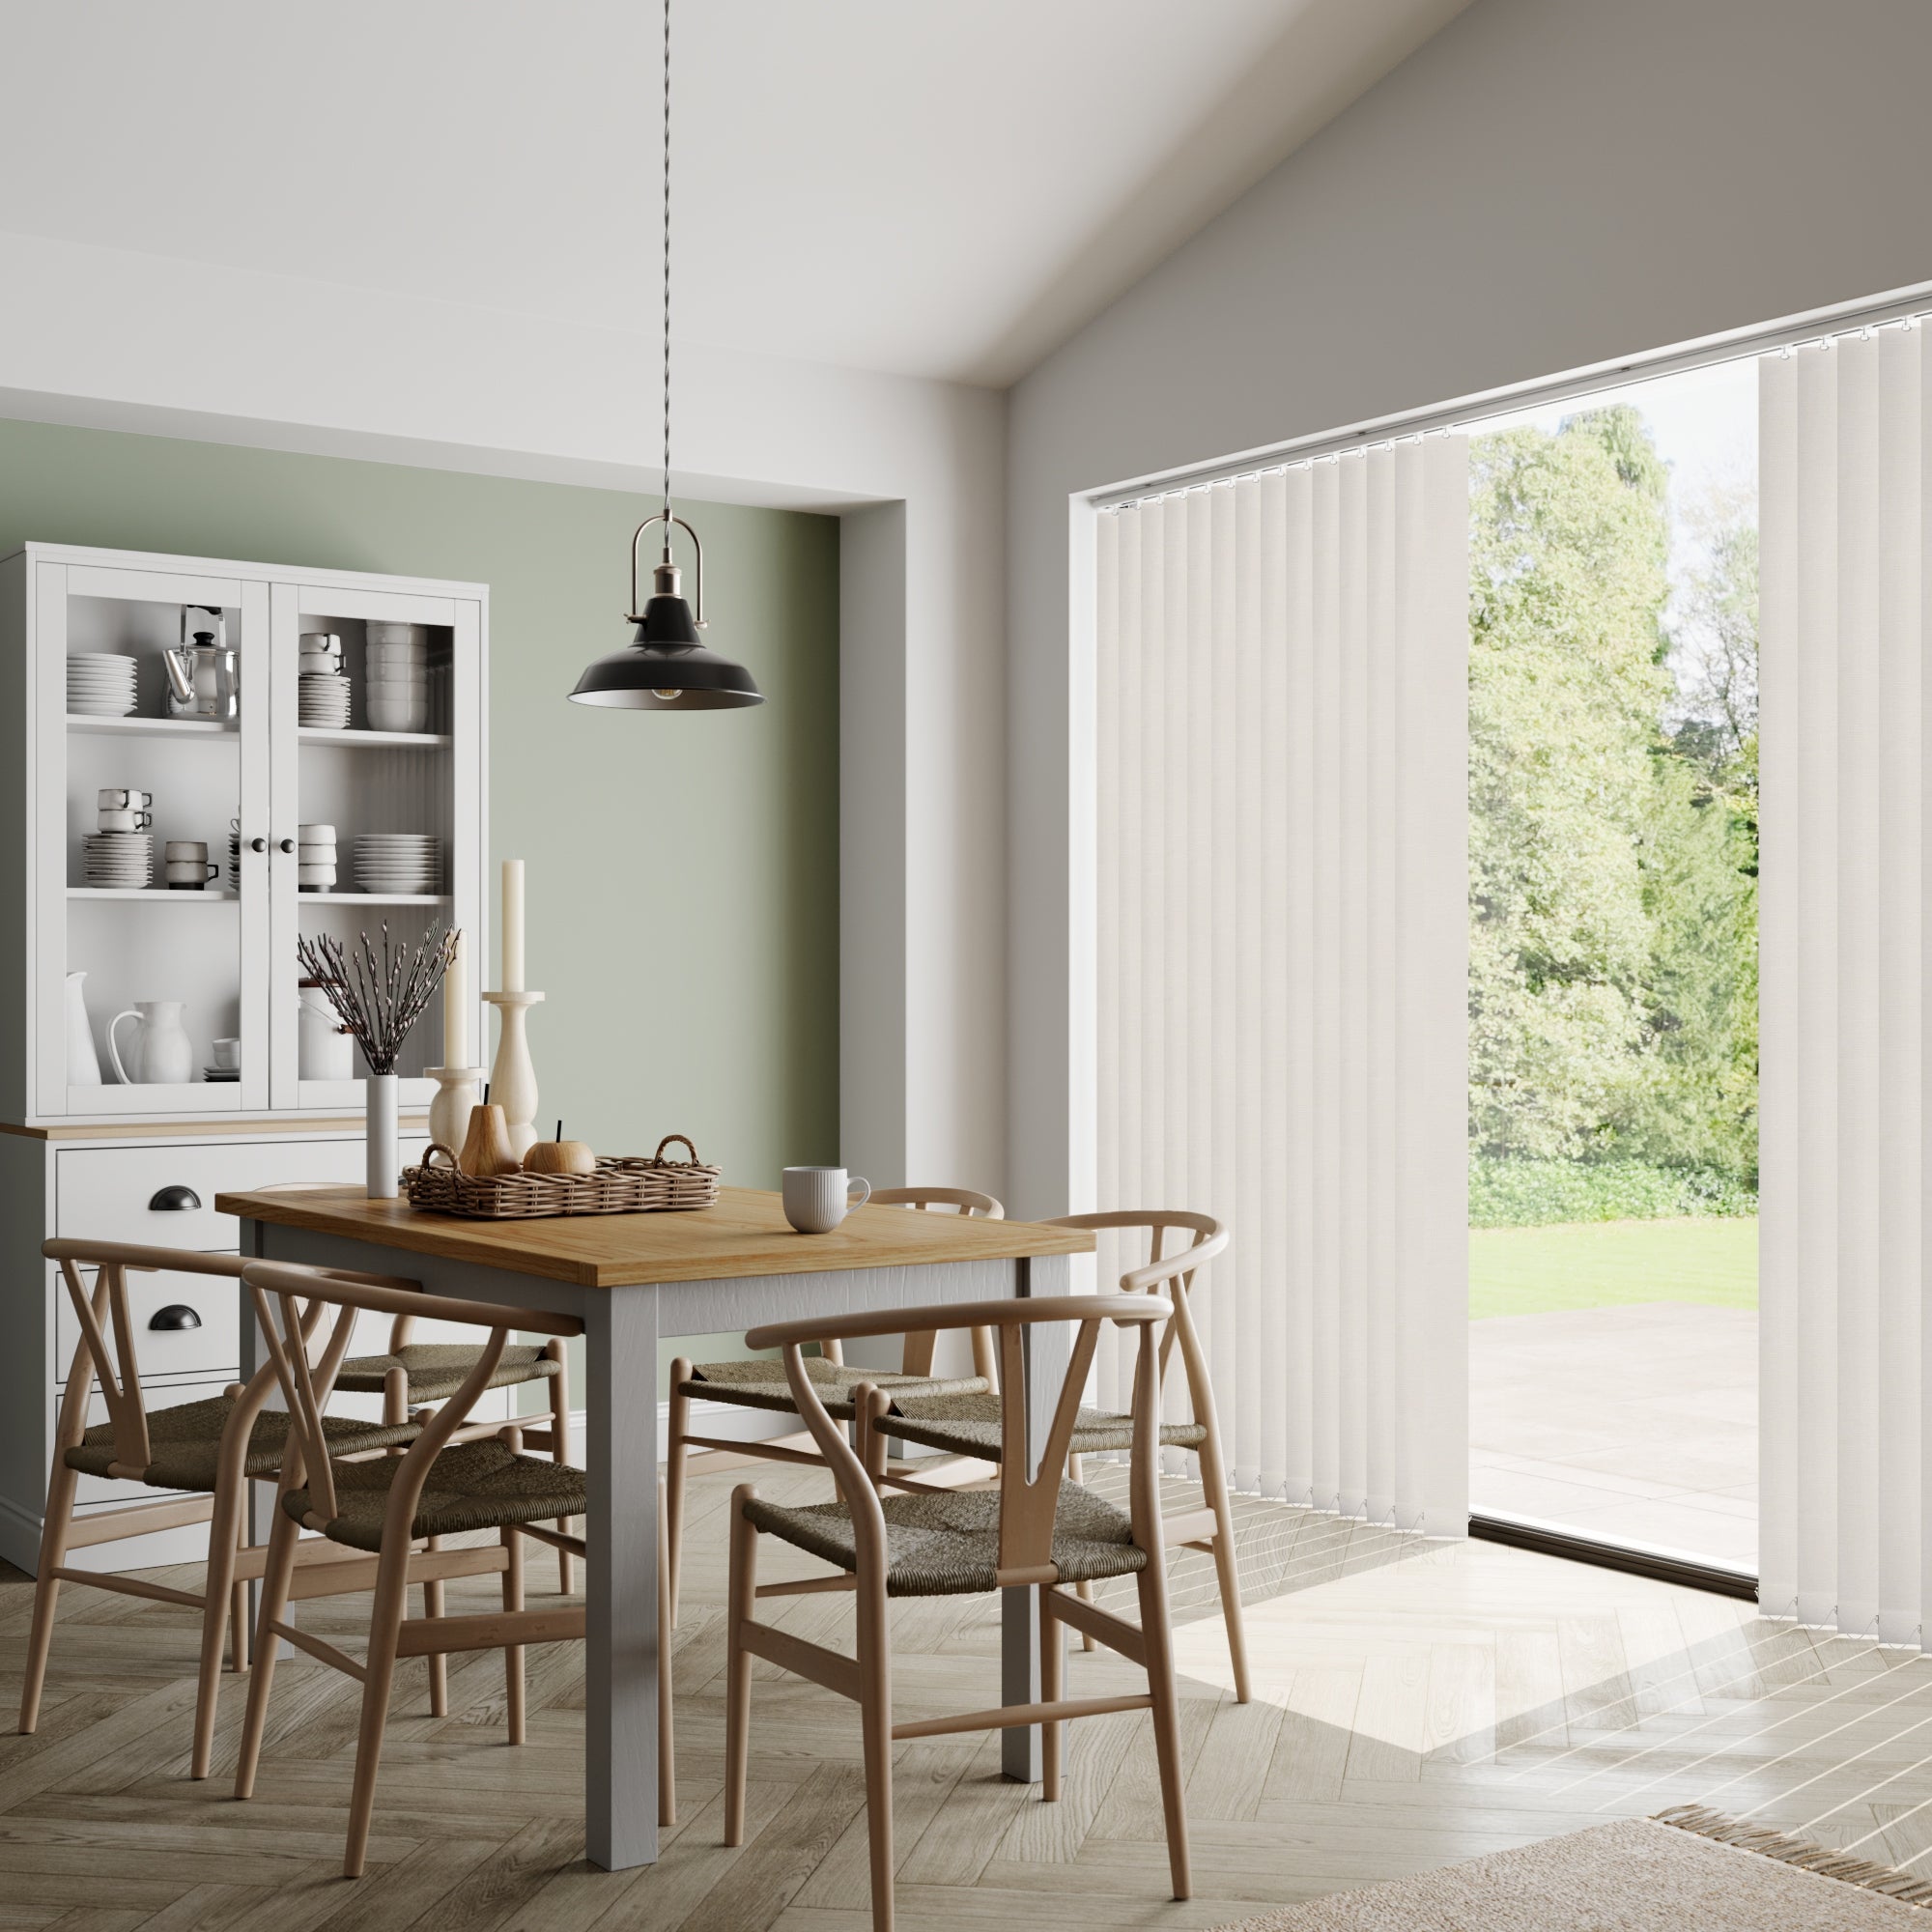 Oxford Blackout Made to Measure Vertical Blind Oxford Cream